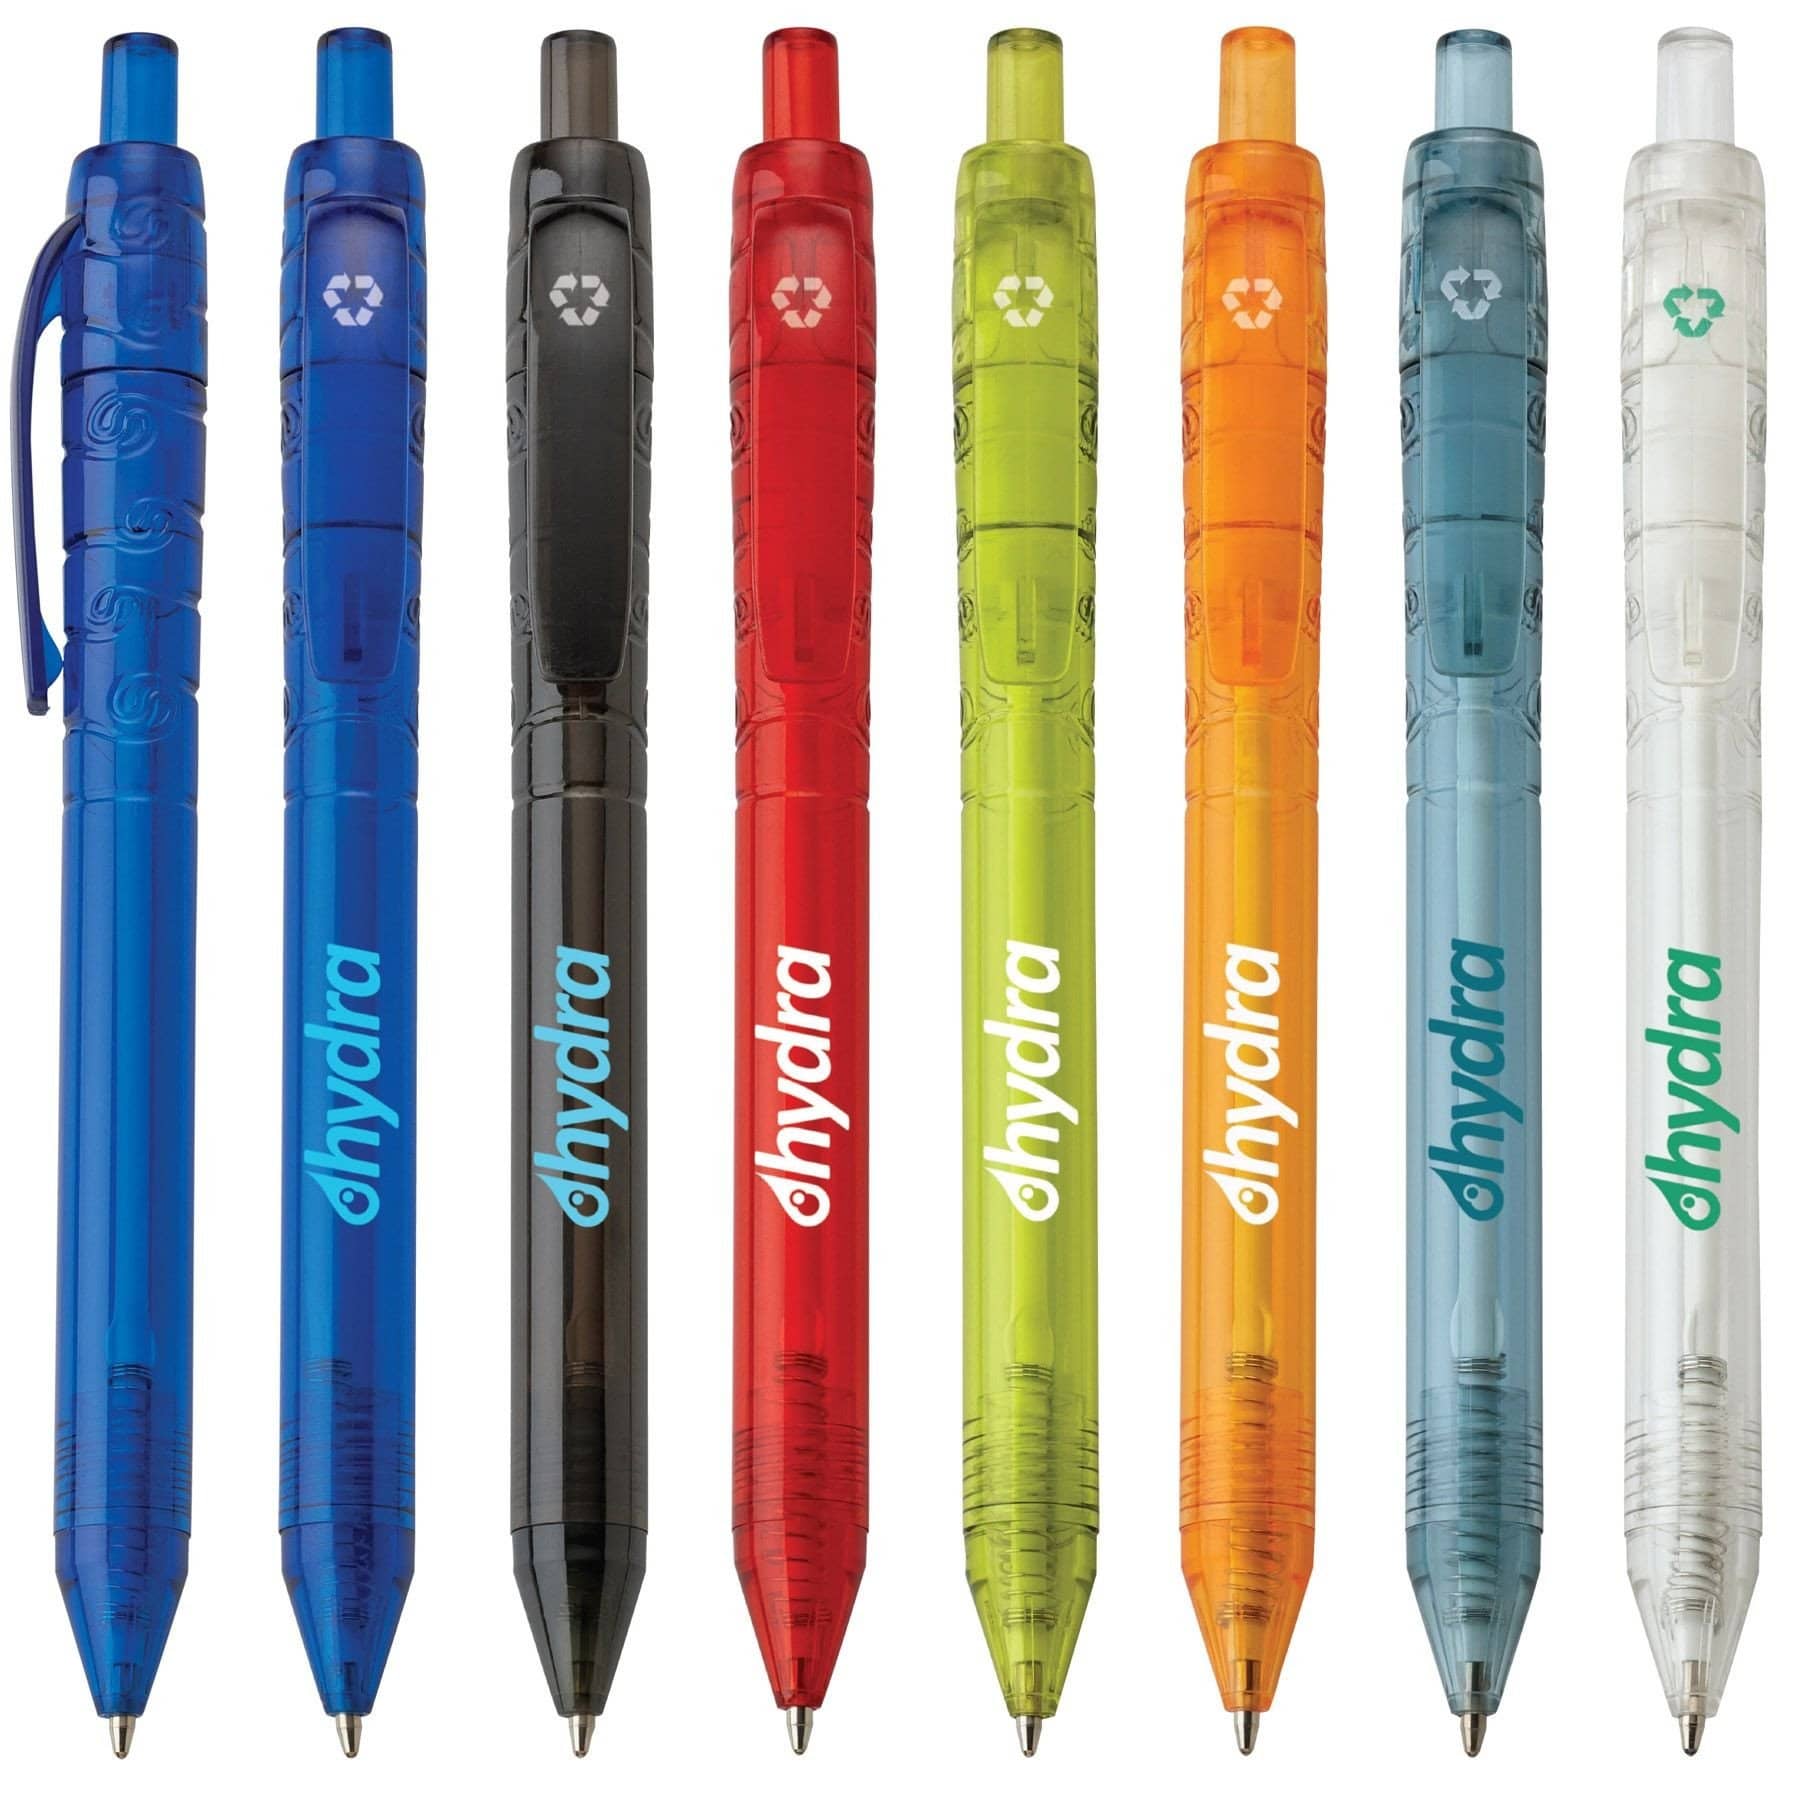 Eco Recycled Marketing Pens